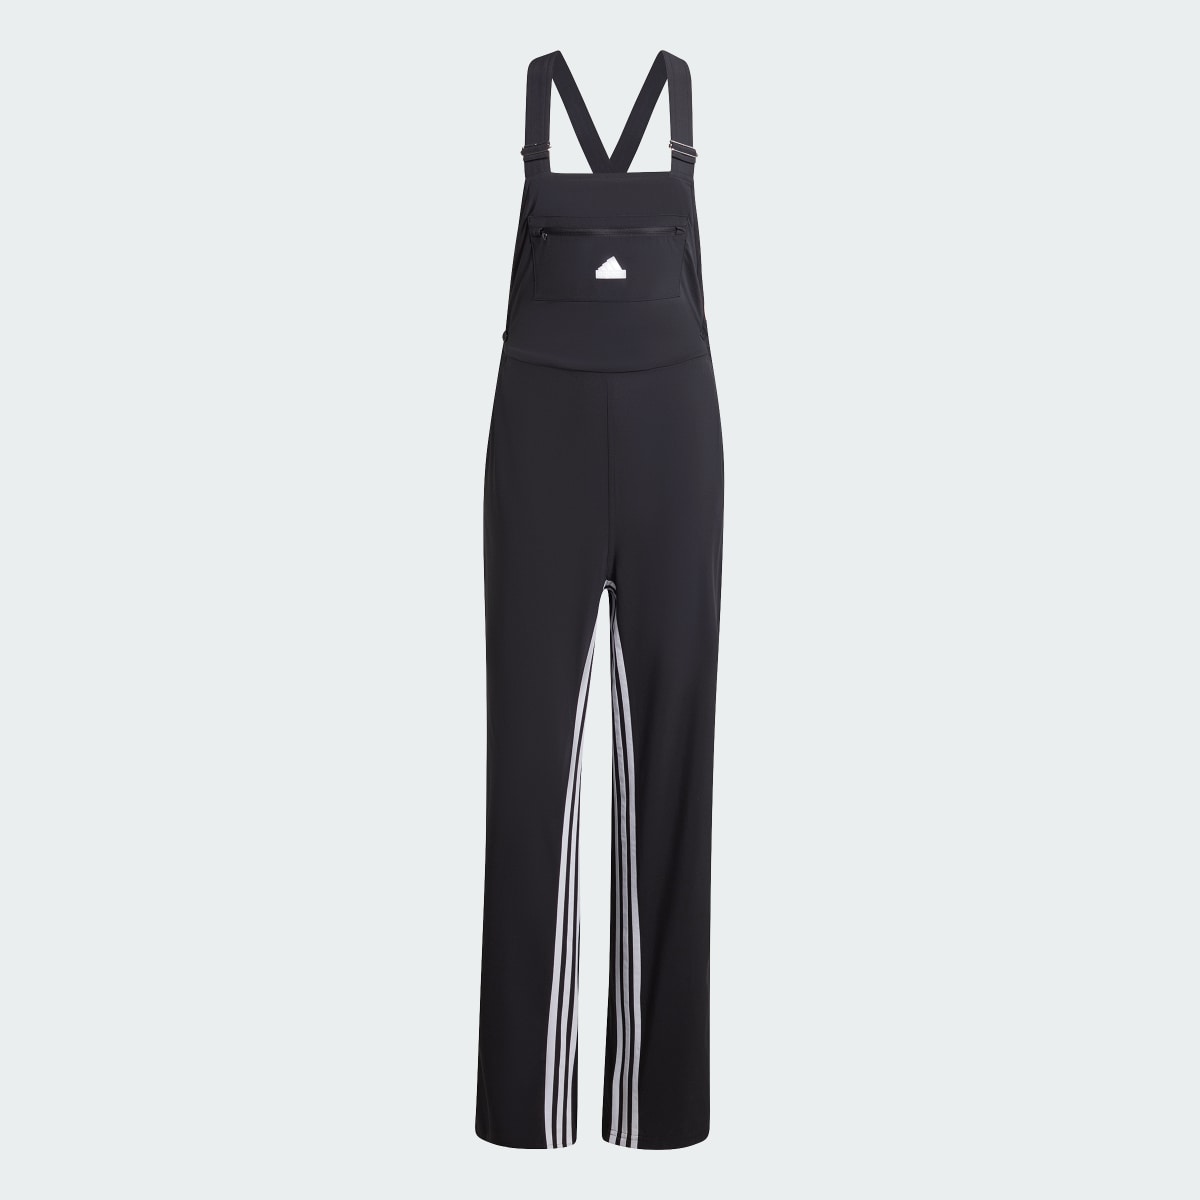 Adidas Dance All-Gender Woven Dungarees. 4